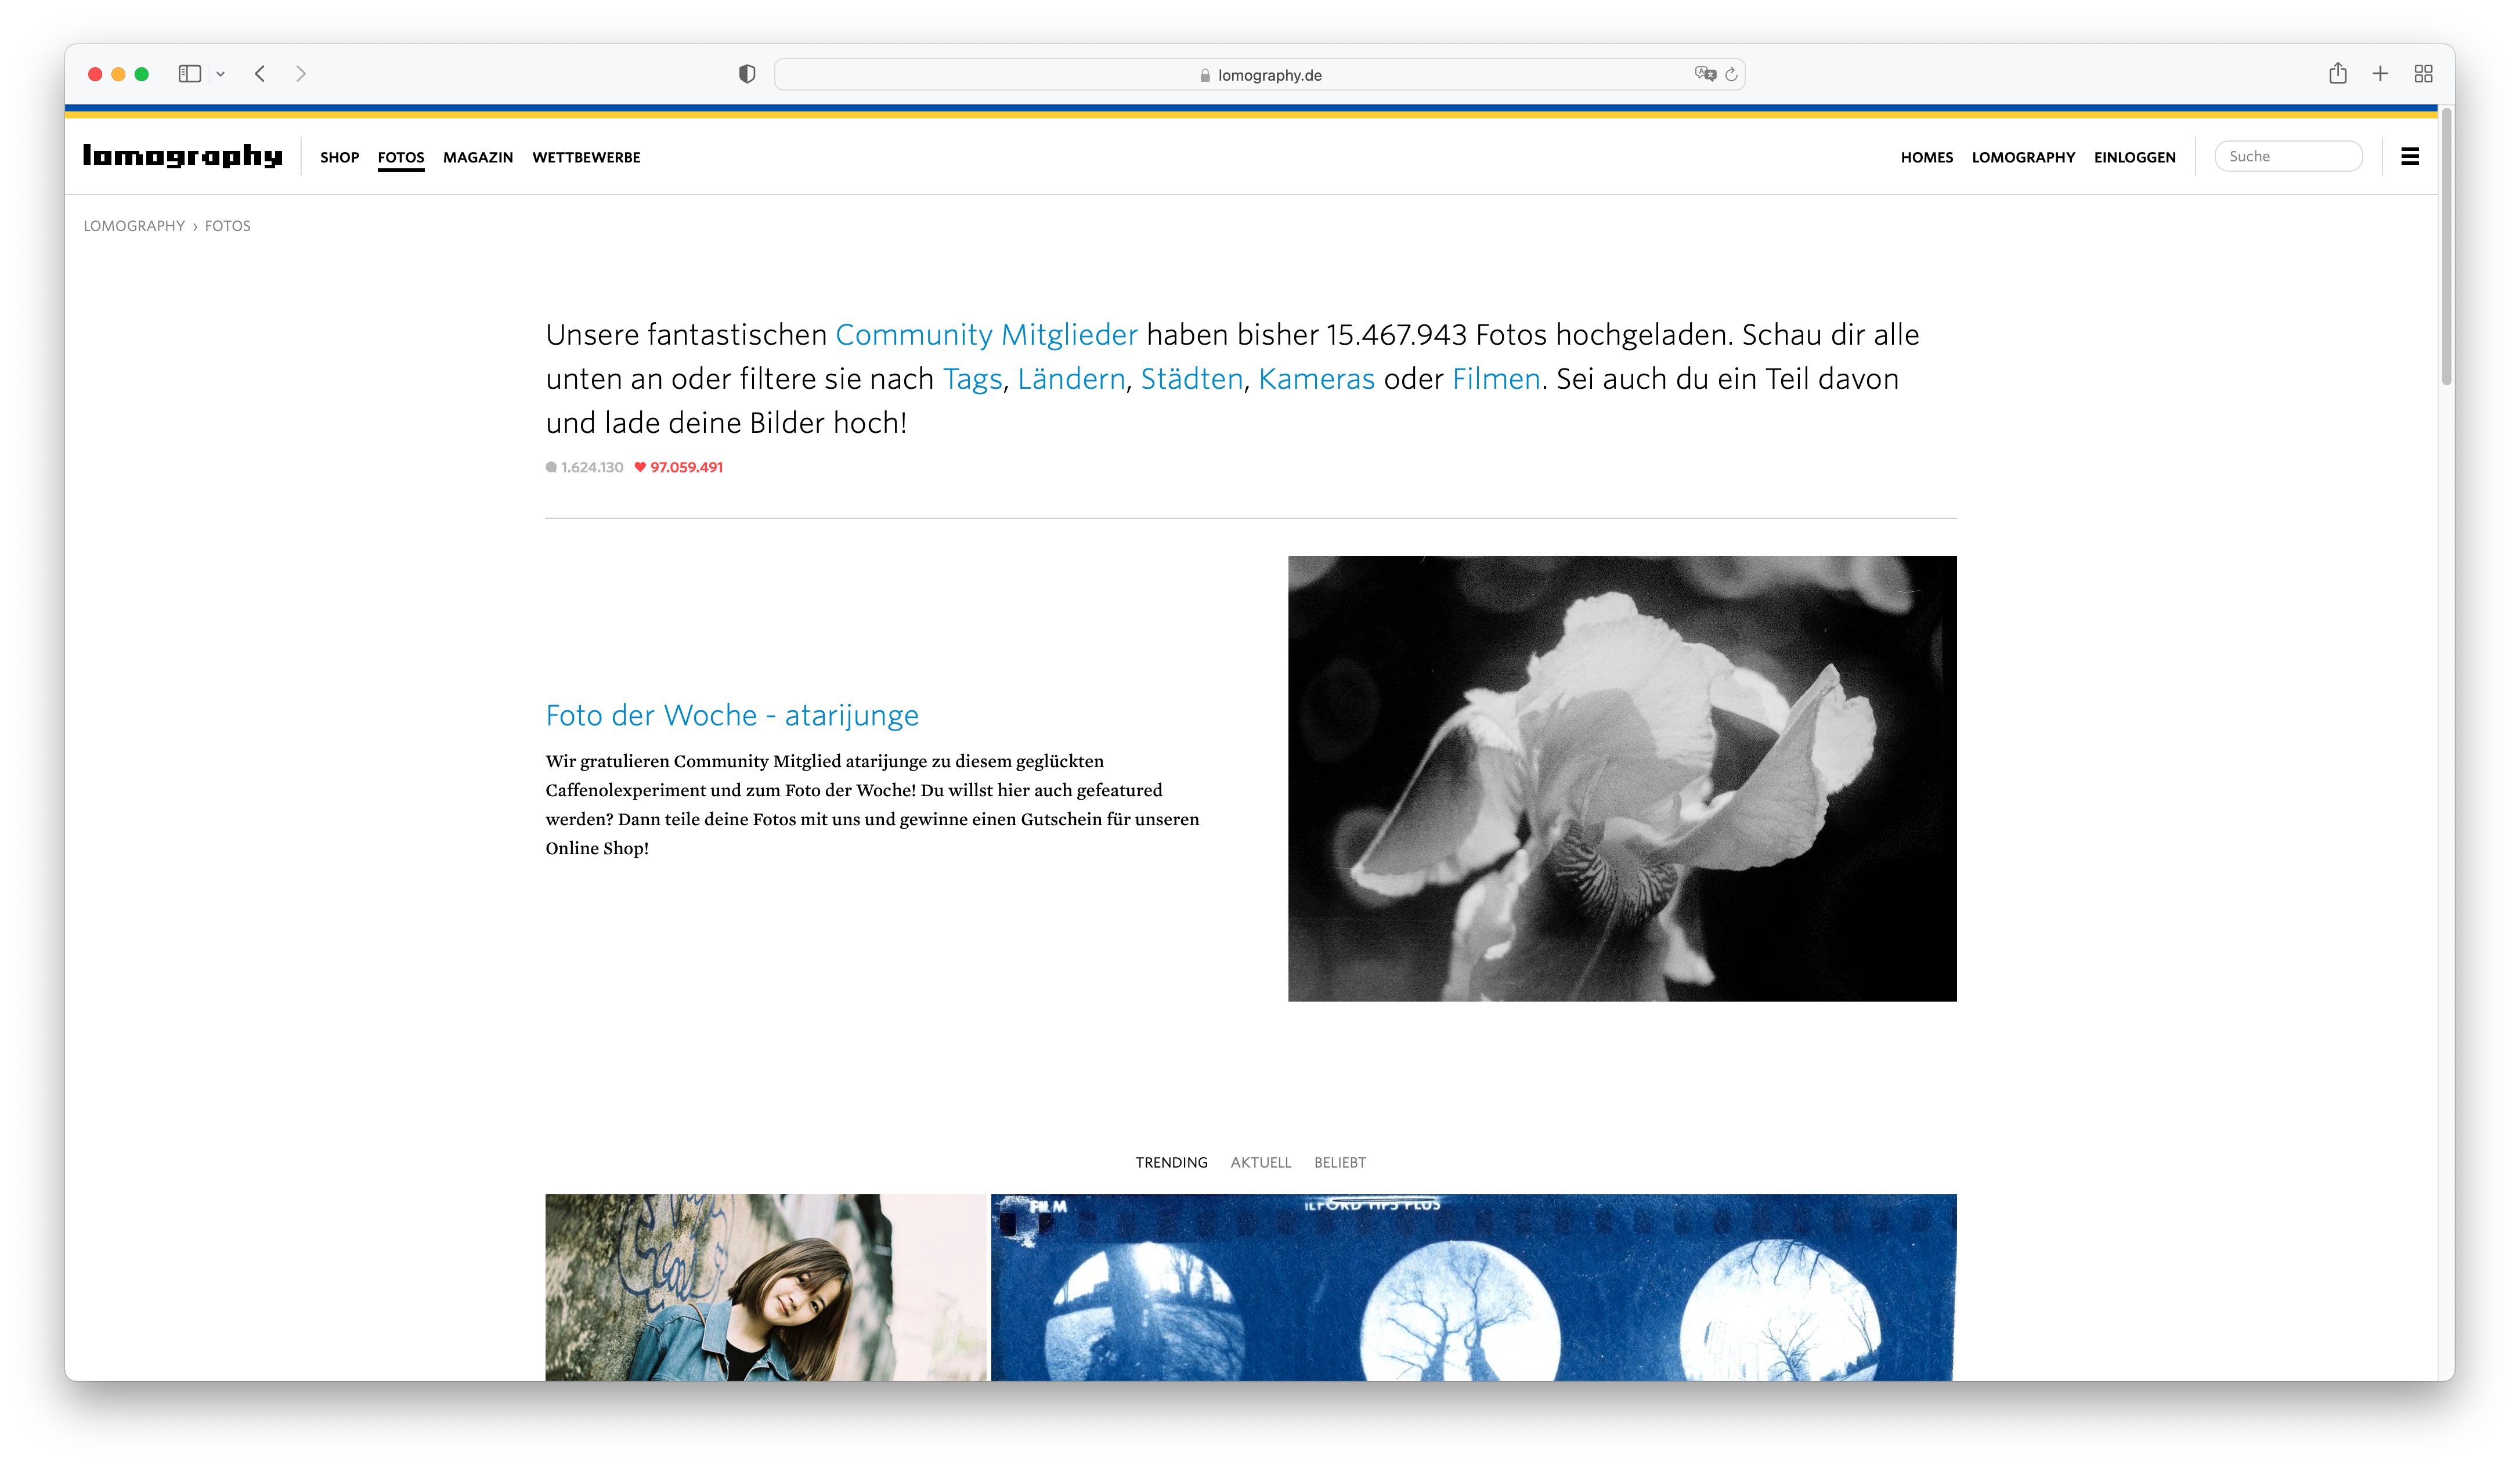 One of my pictures was chosen by Lomography.de as “Foto Der Woche”